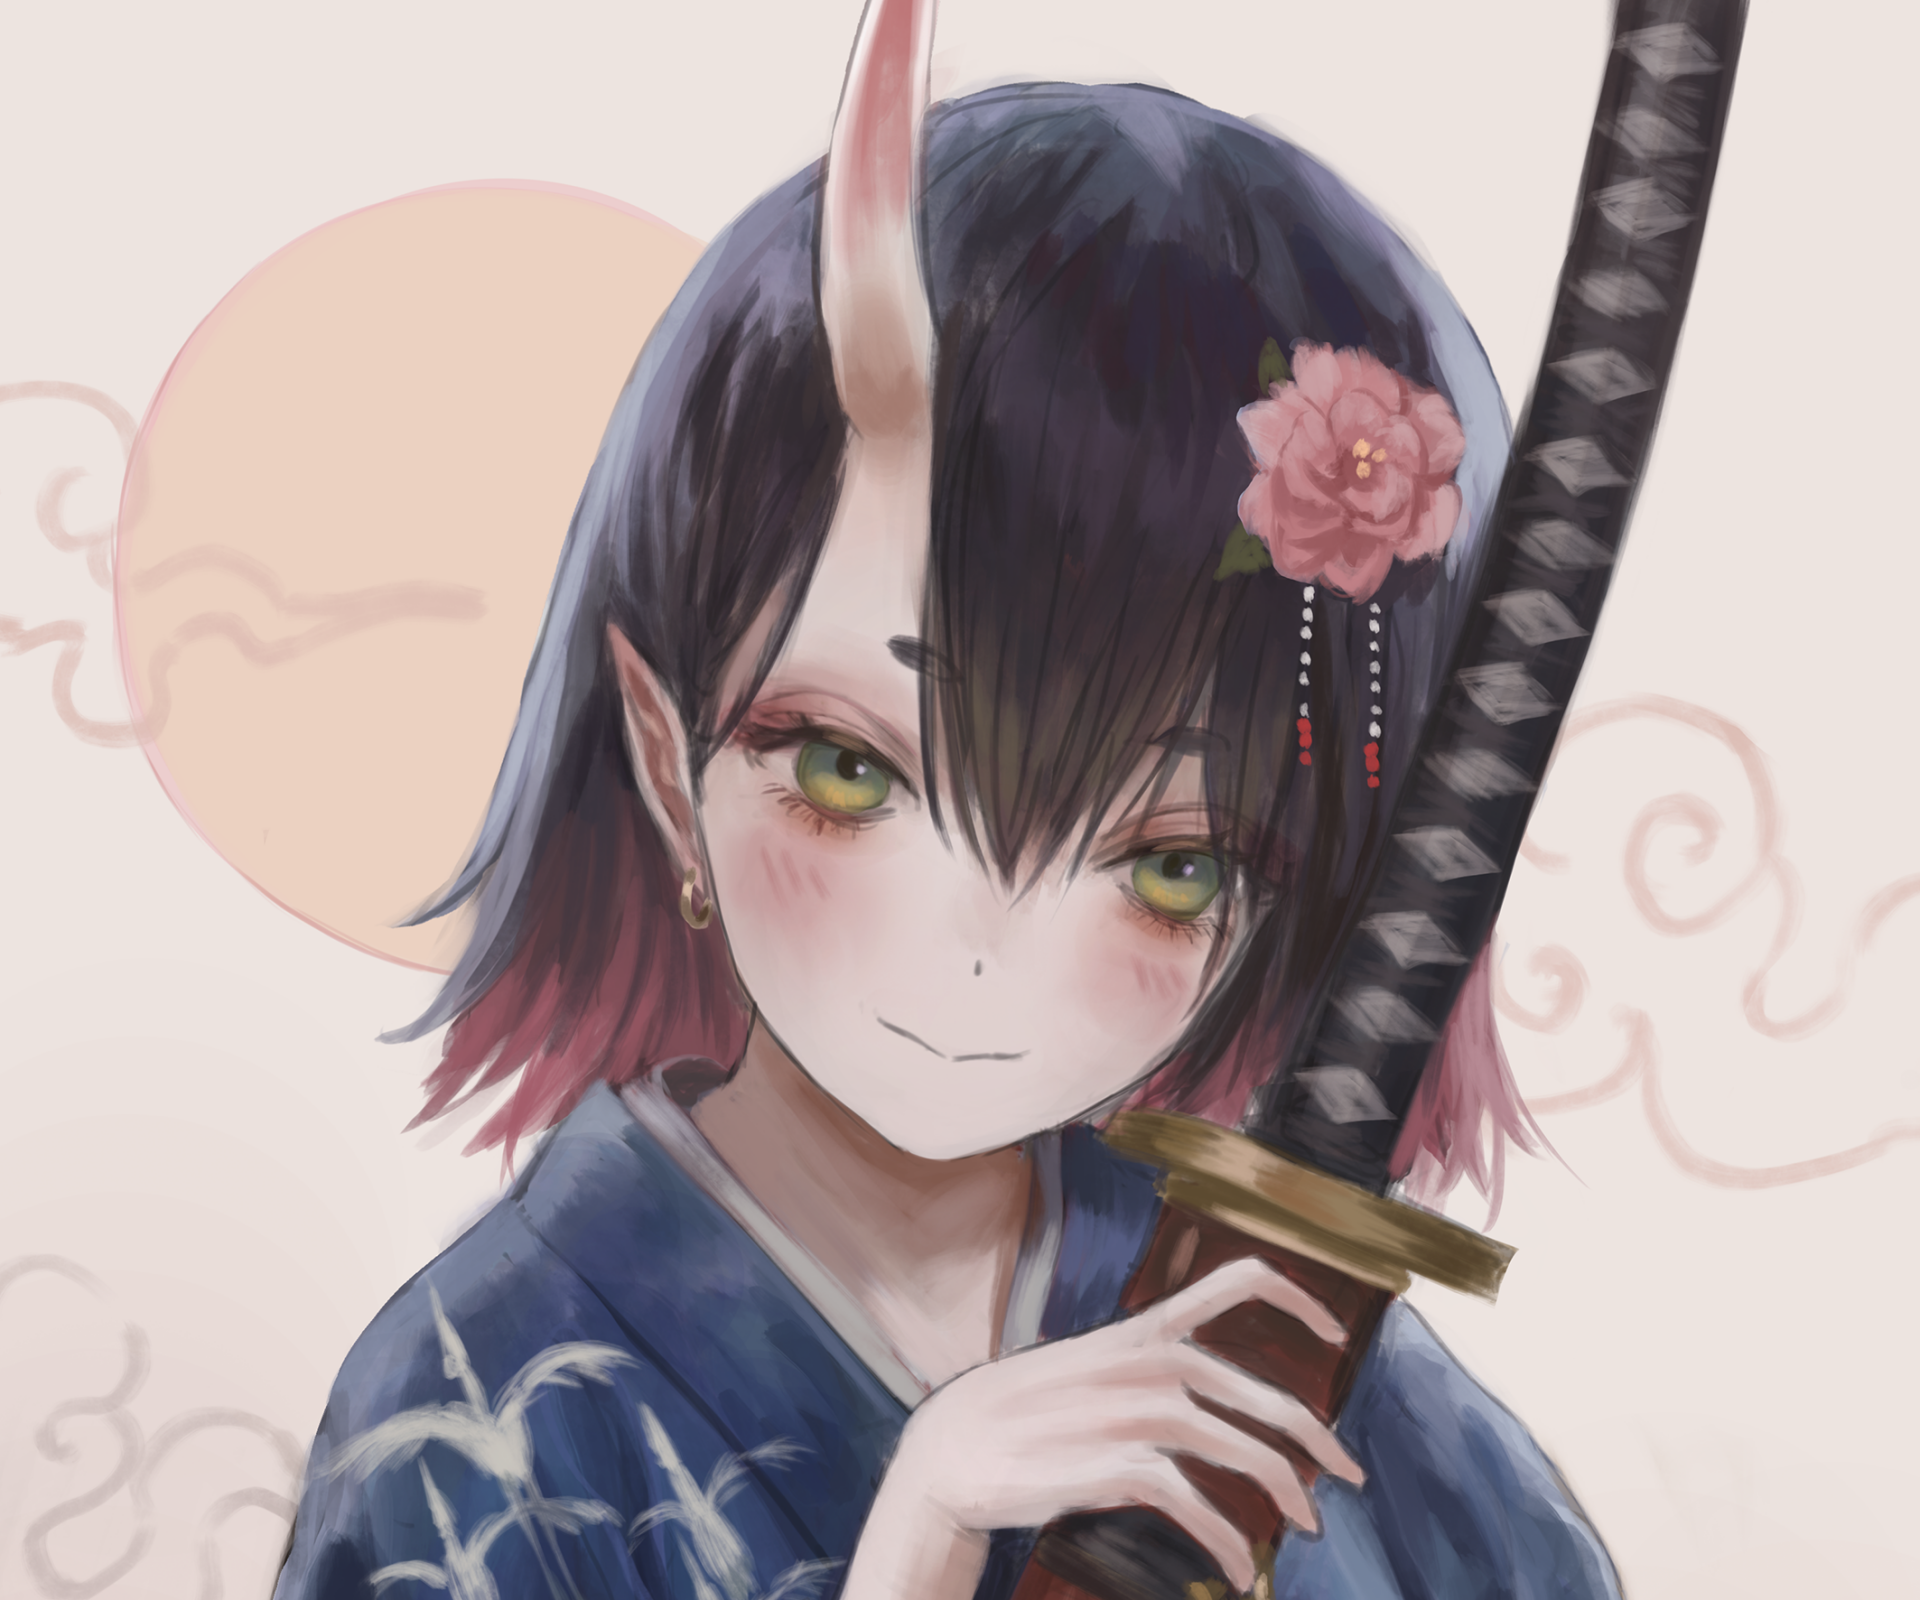 Anime 1920x1600 anime anime girls fantasy girl fantasy art flower in hair pointy ears sword weapon women with swords dark hair green eyes looking at viewer simple background hair in face horns oni girl